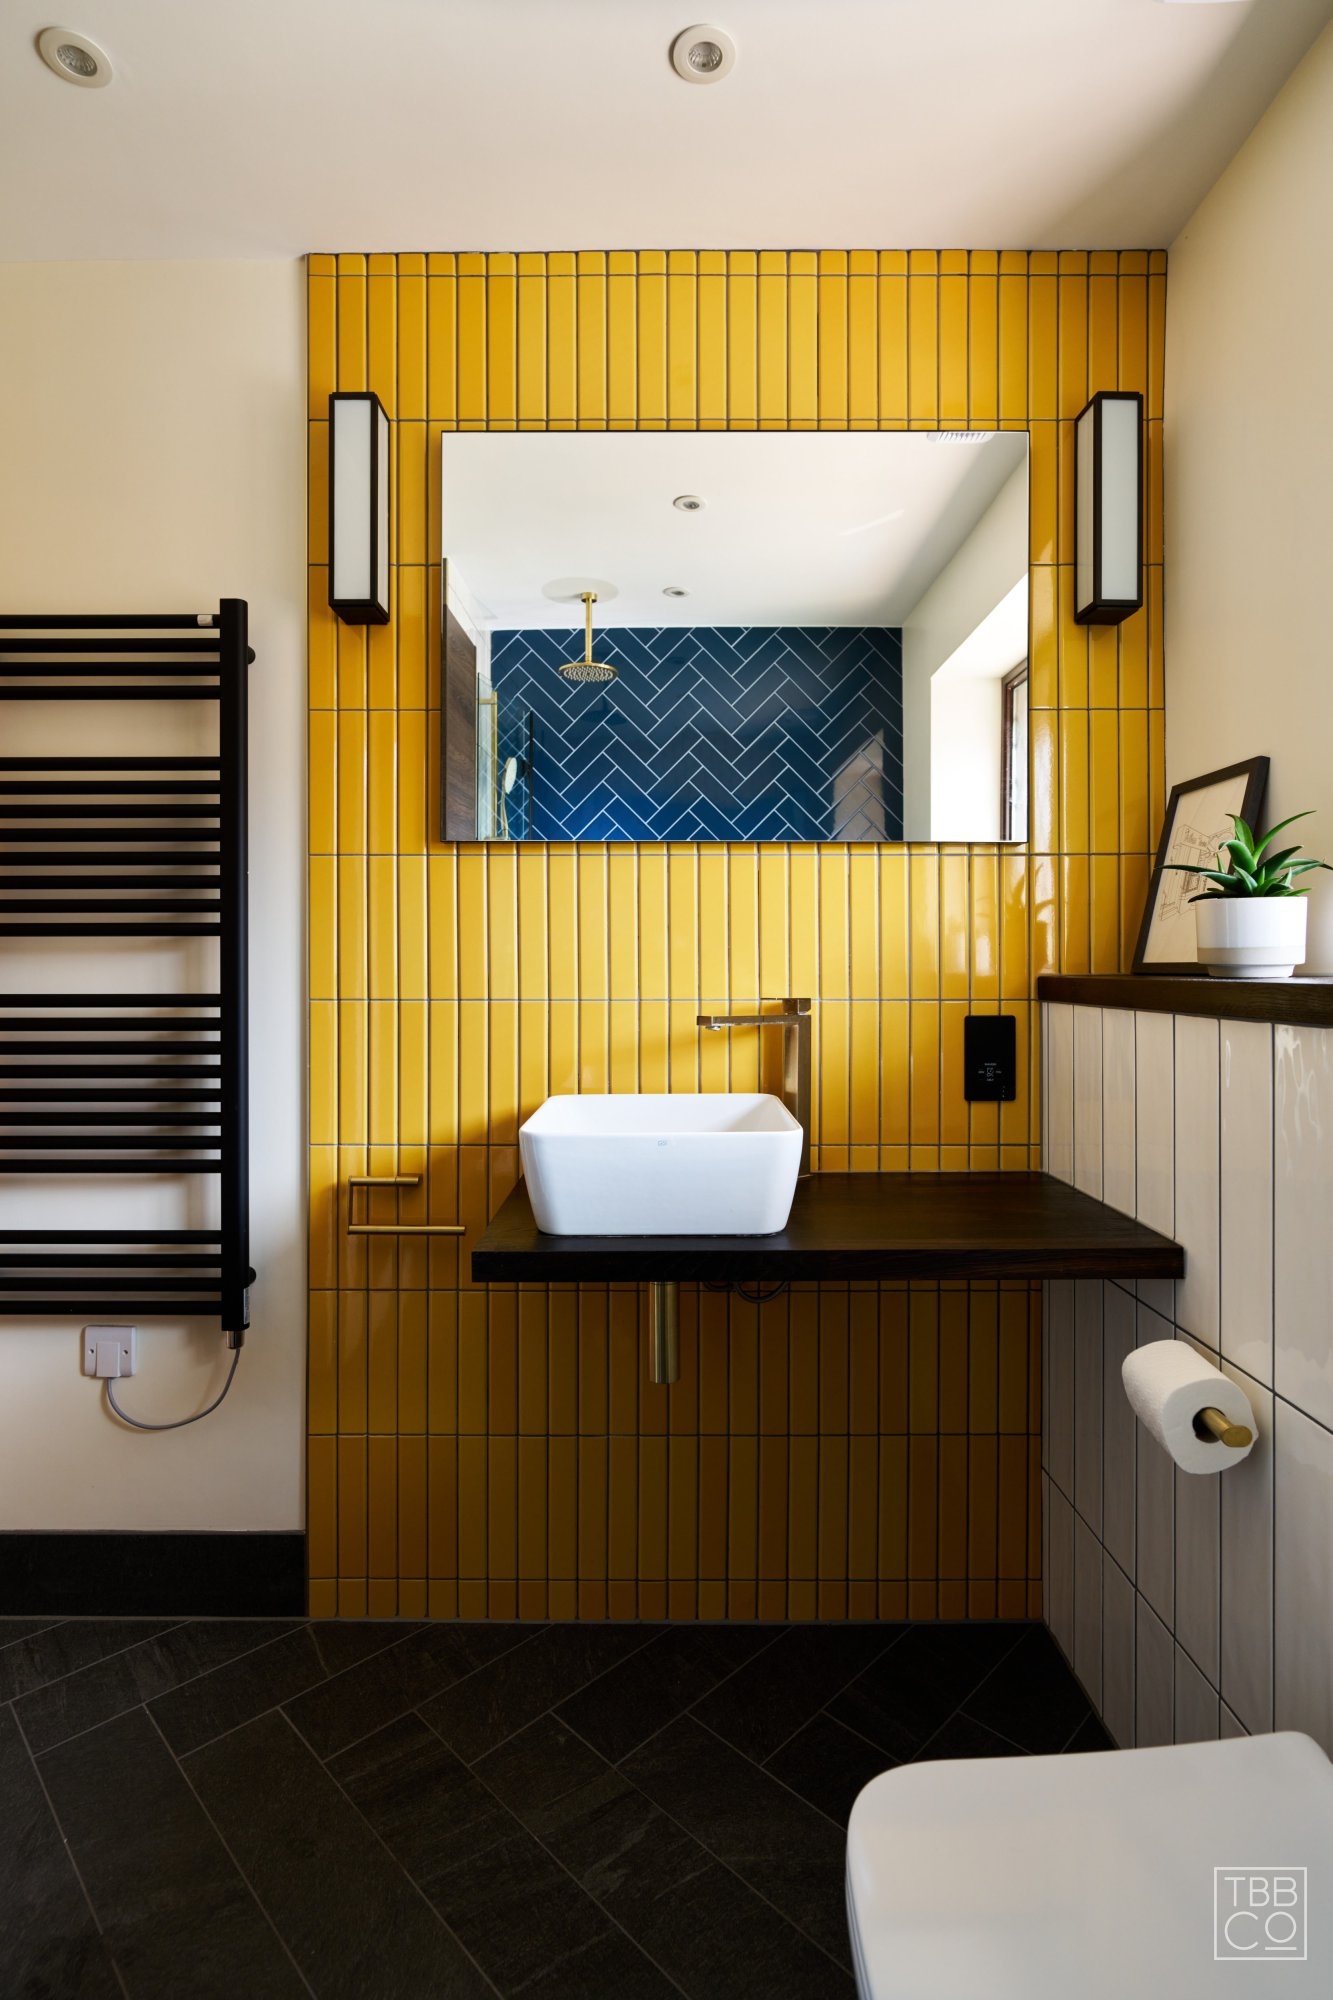 Yellow Feature Tiles with Black Wall Lights above Basin